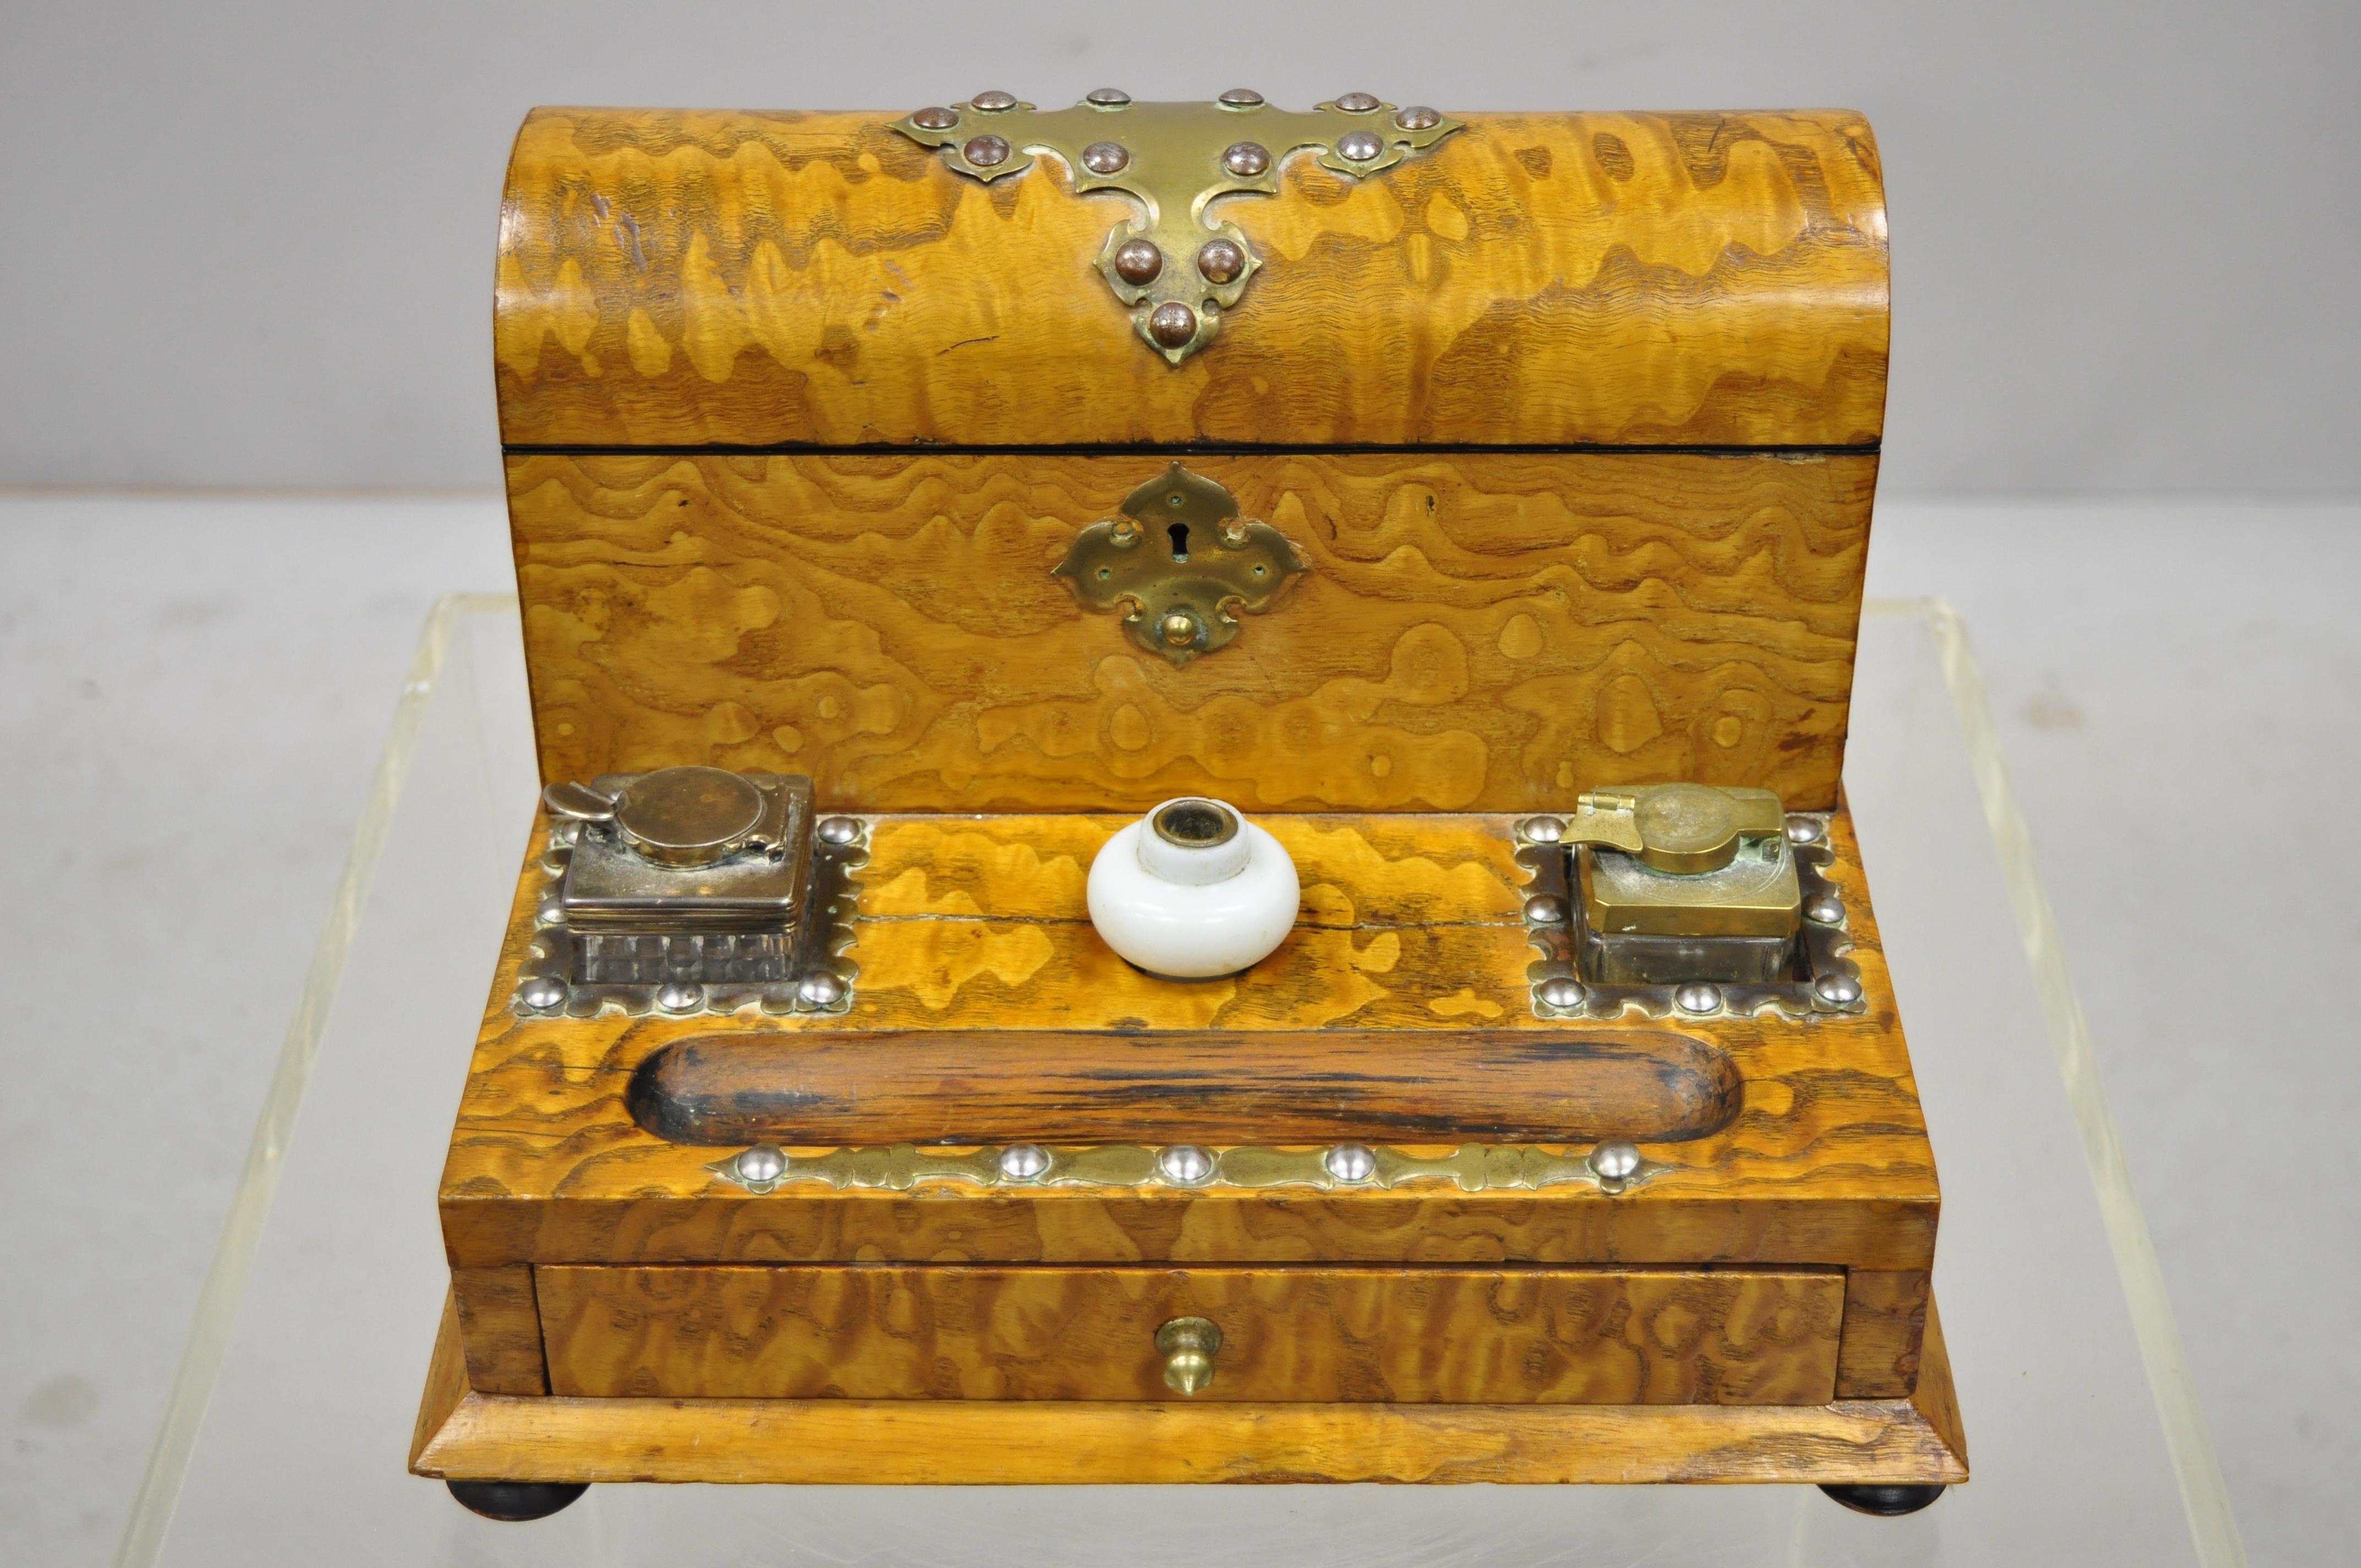 19th century English burl wood and rosewood Parkins & Gotto inkwell desk letterbox. Item includes a brass ormolu, glass inkwells, bun feet, beautiful wood grain, original label, no key, but unlocked, 1 dovetailed drawer, very nice antique item,